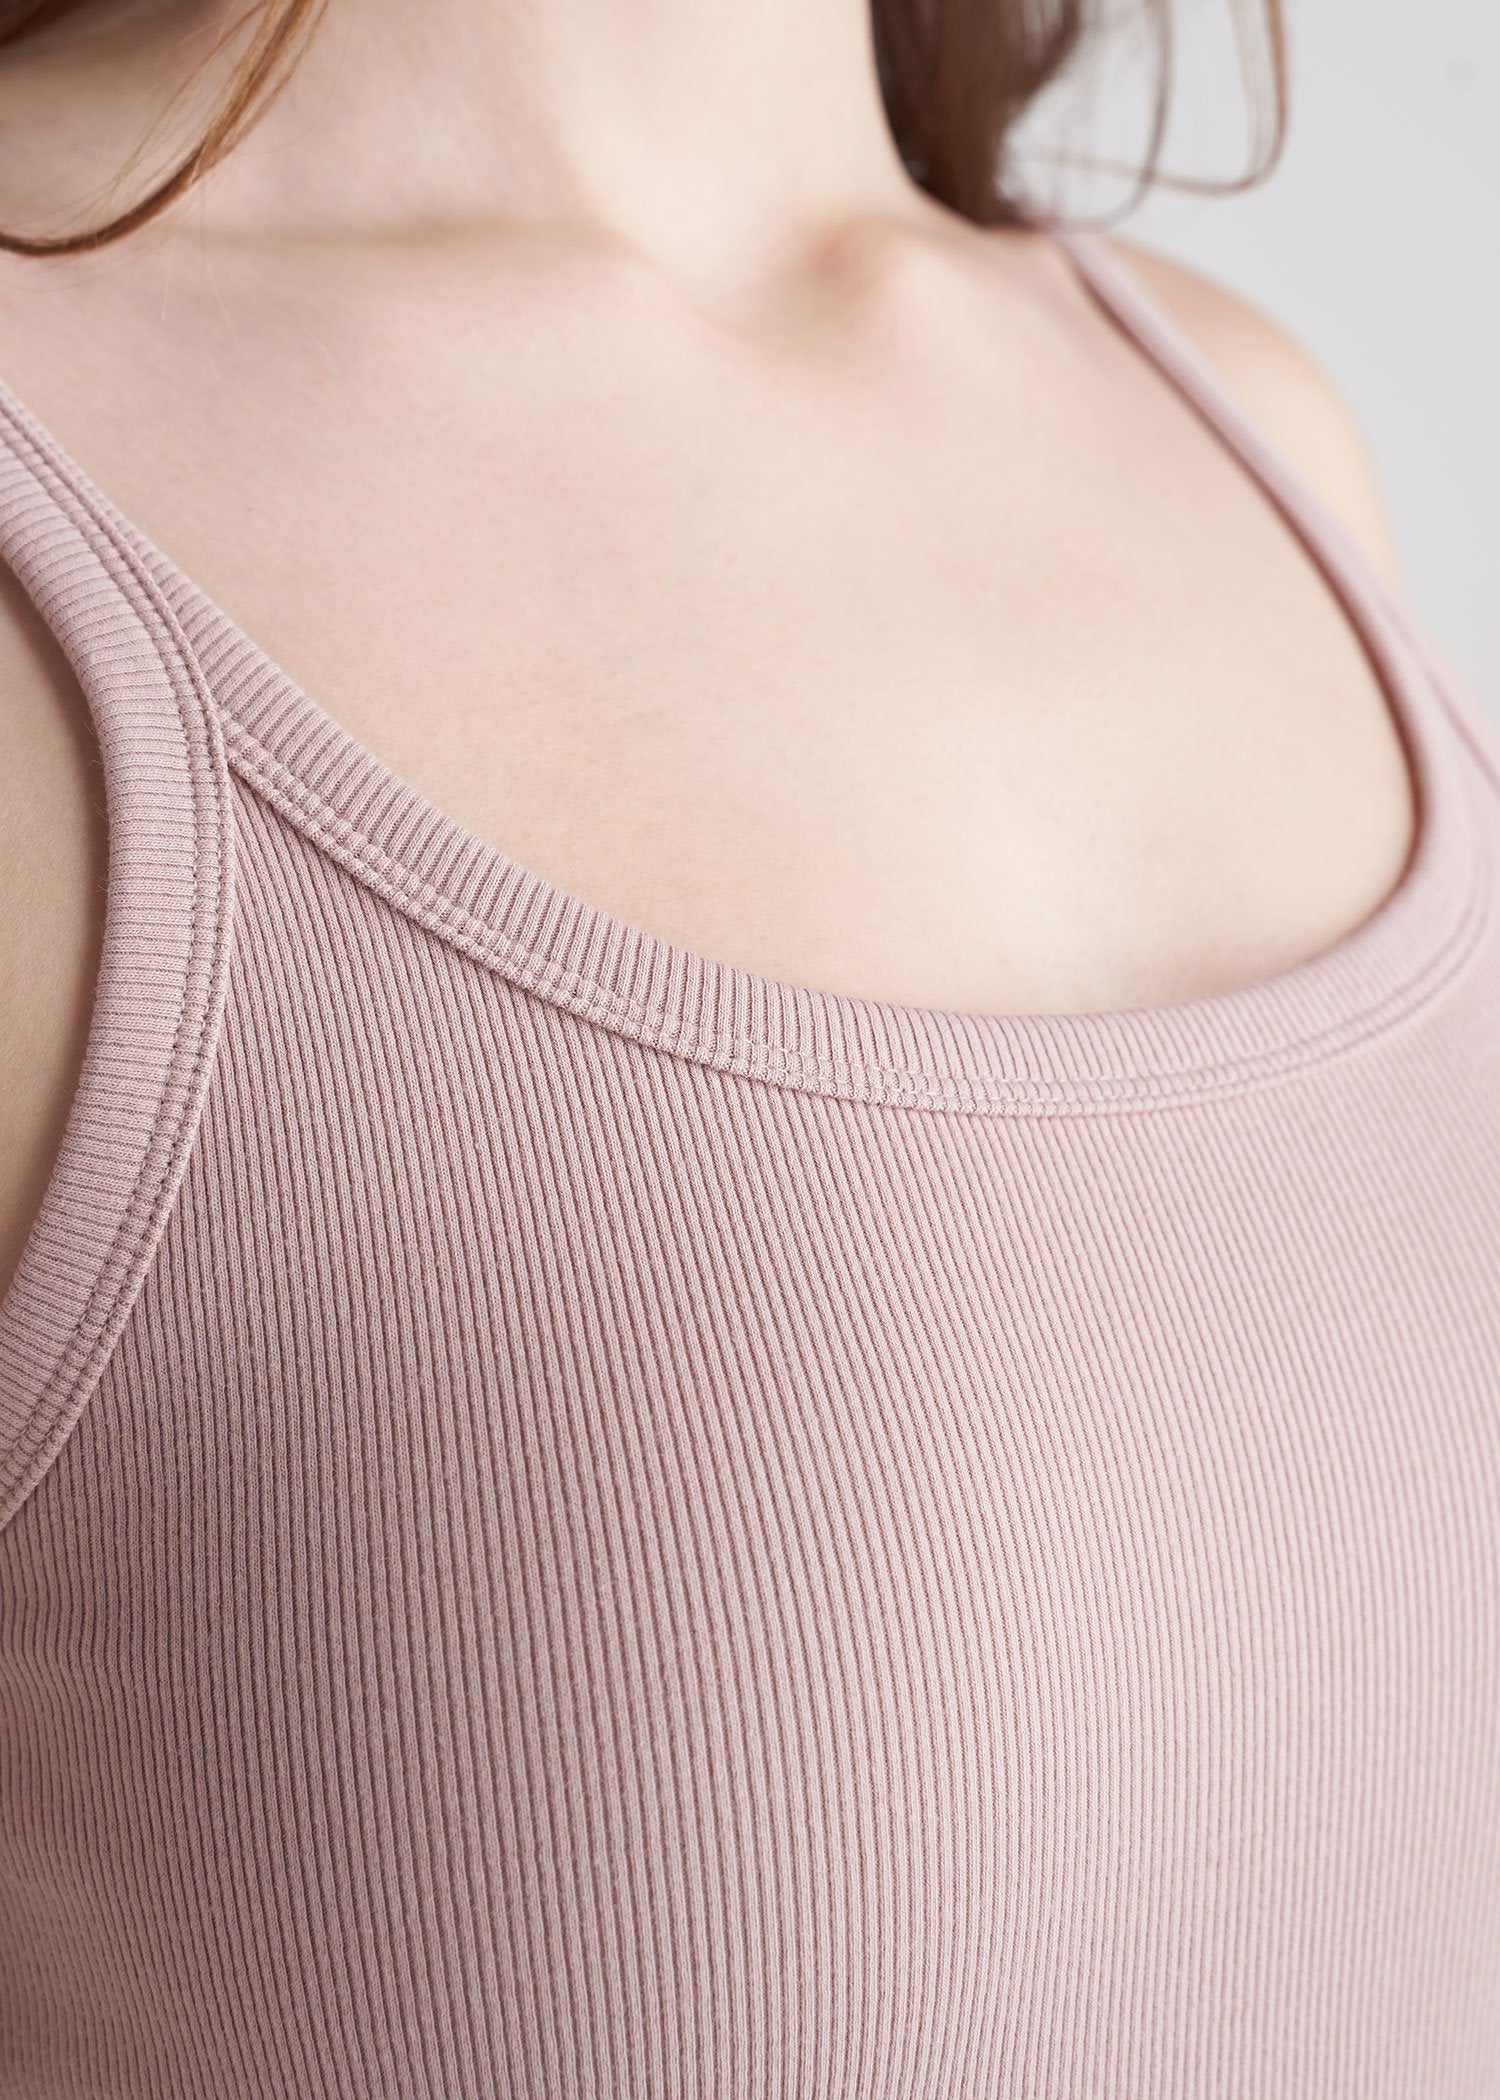 Organic Cotton+Spandex Ribbed Tank Tops for Girls - Pink